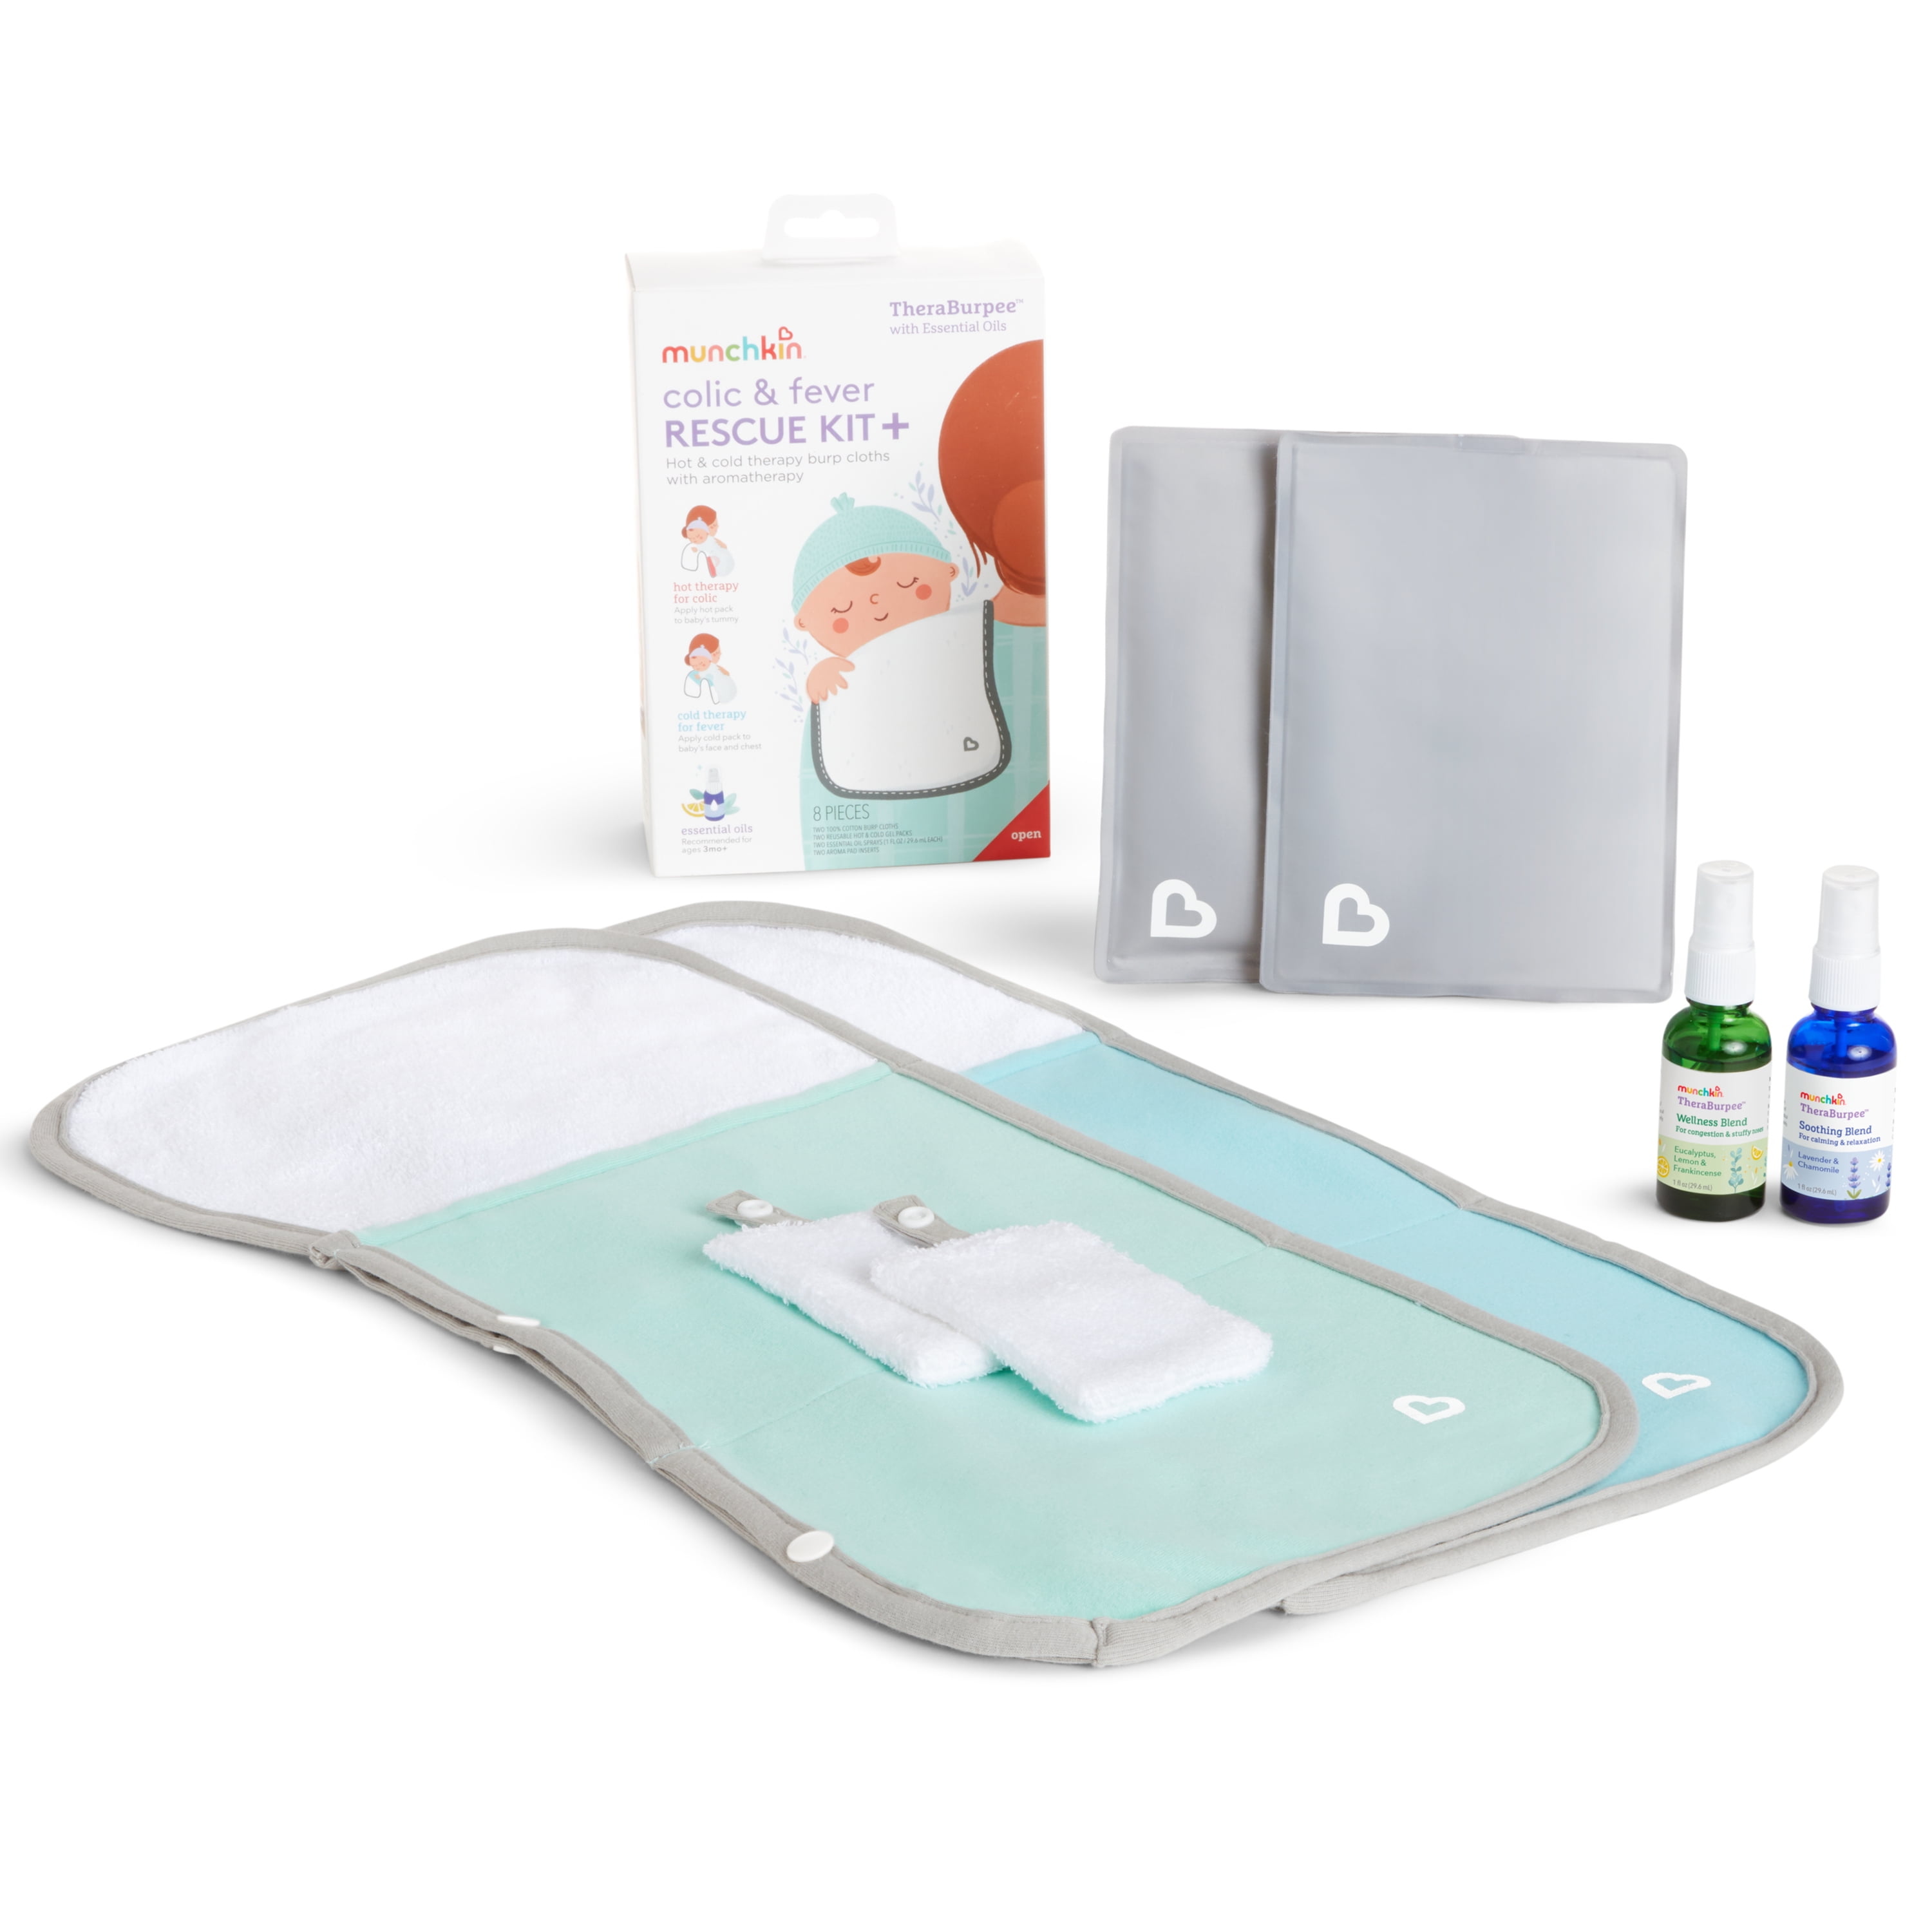 Munchkin TheraBurpee with Essential Oils: Colic & Fever Rescue Kit + with Hot & Cold Therapy Burp Cloths & Aromatherapy